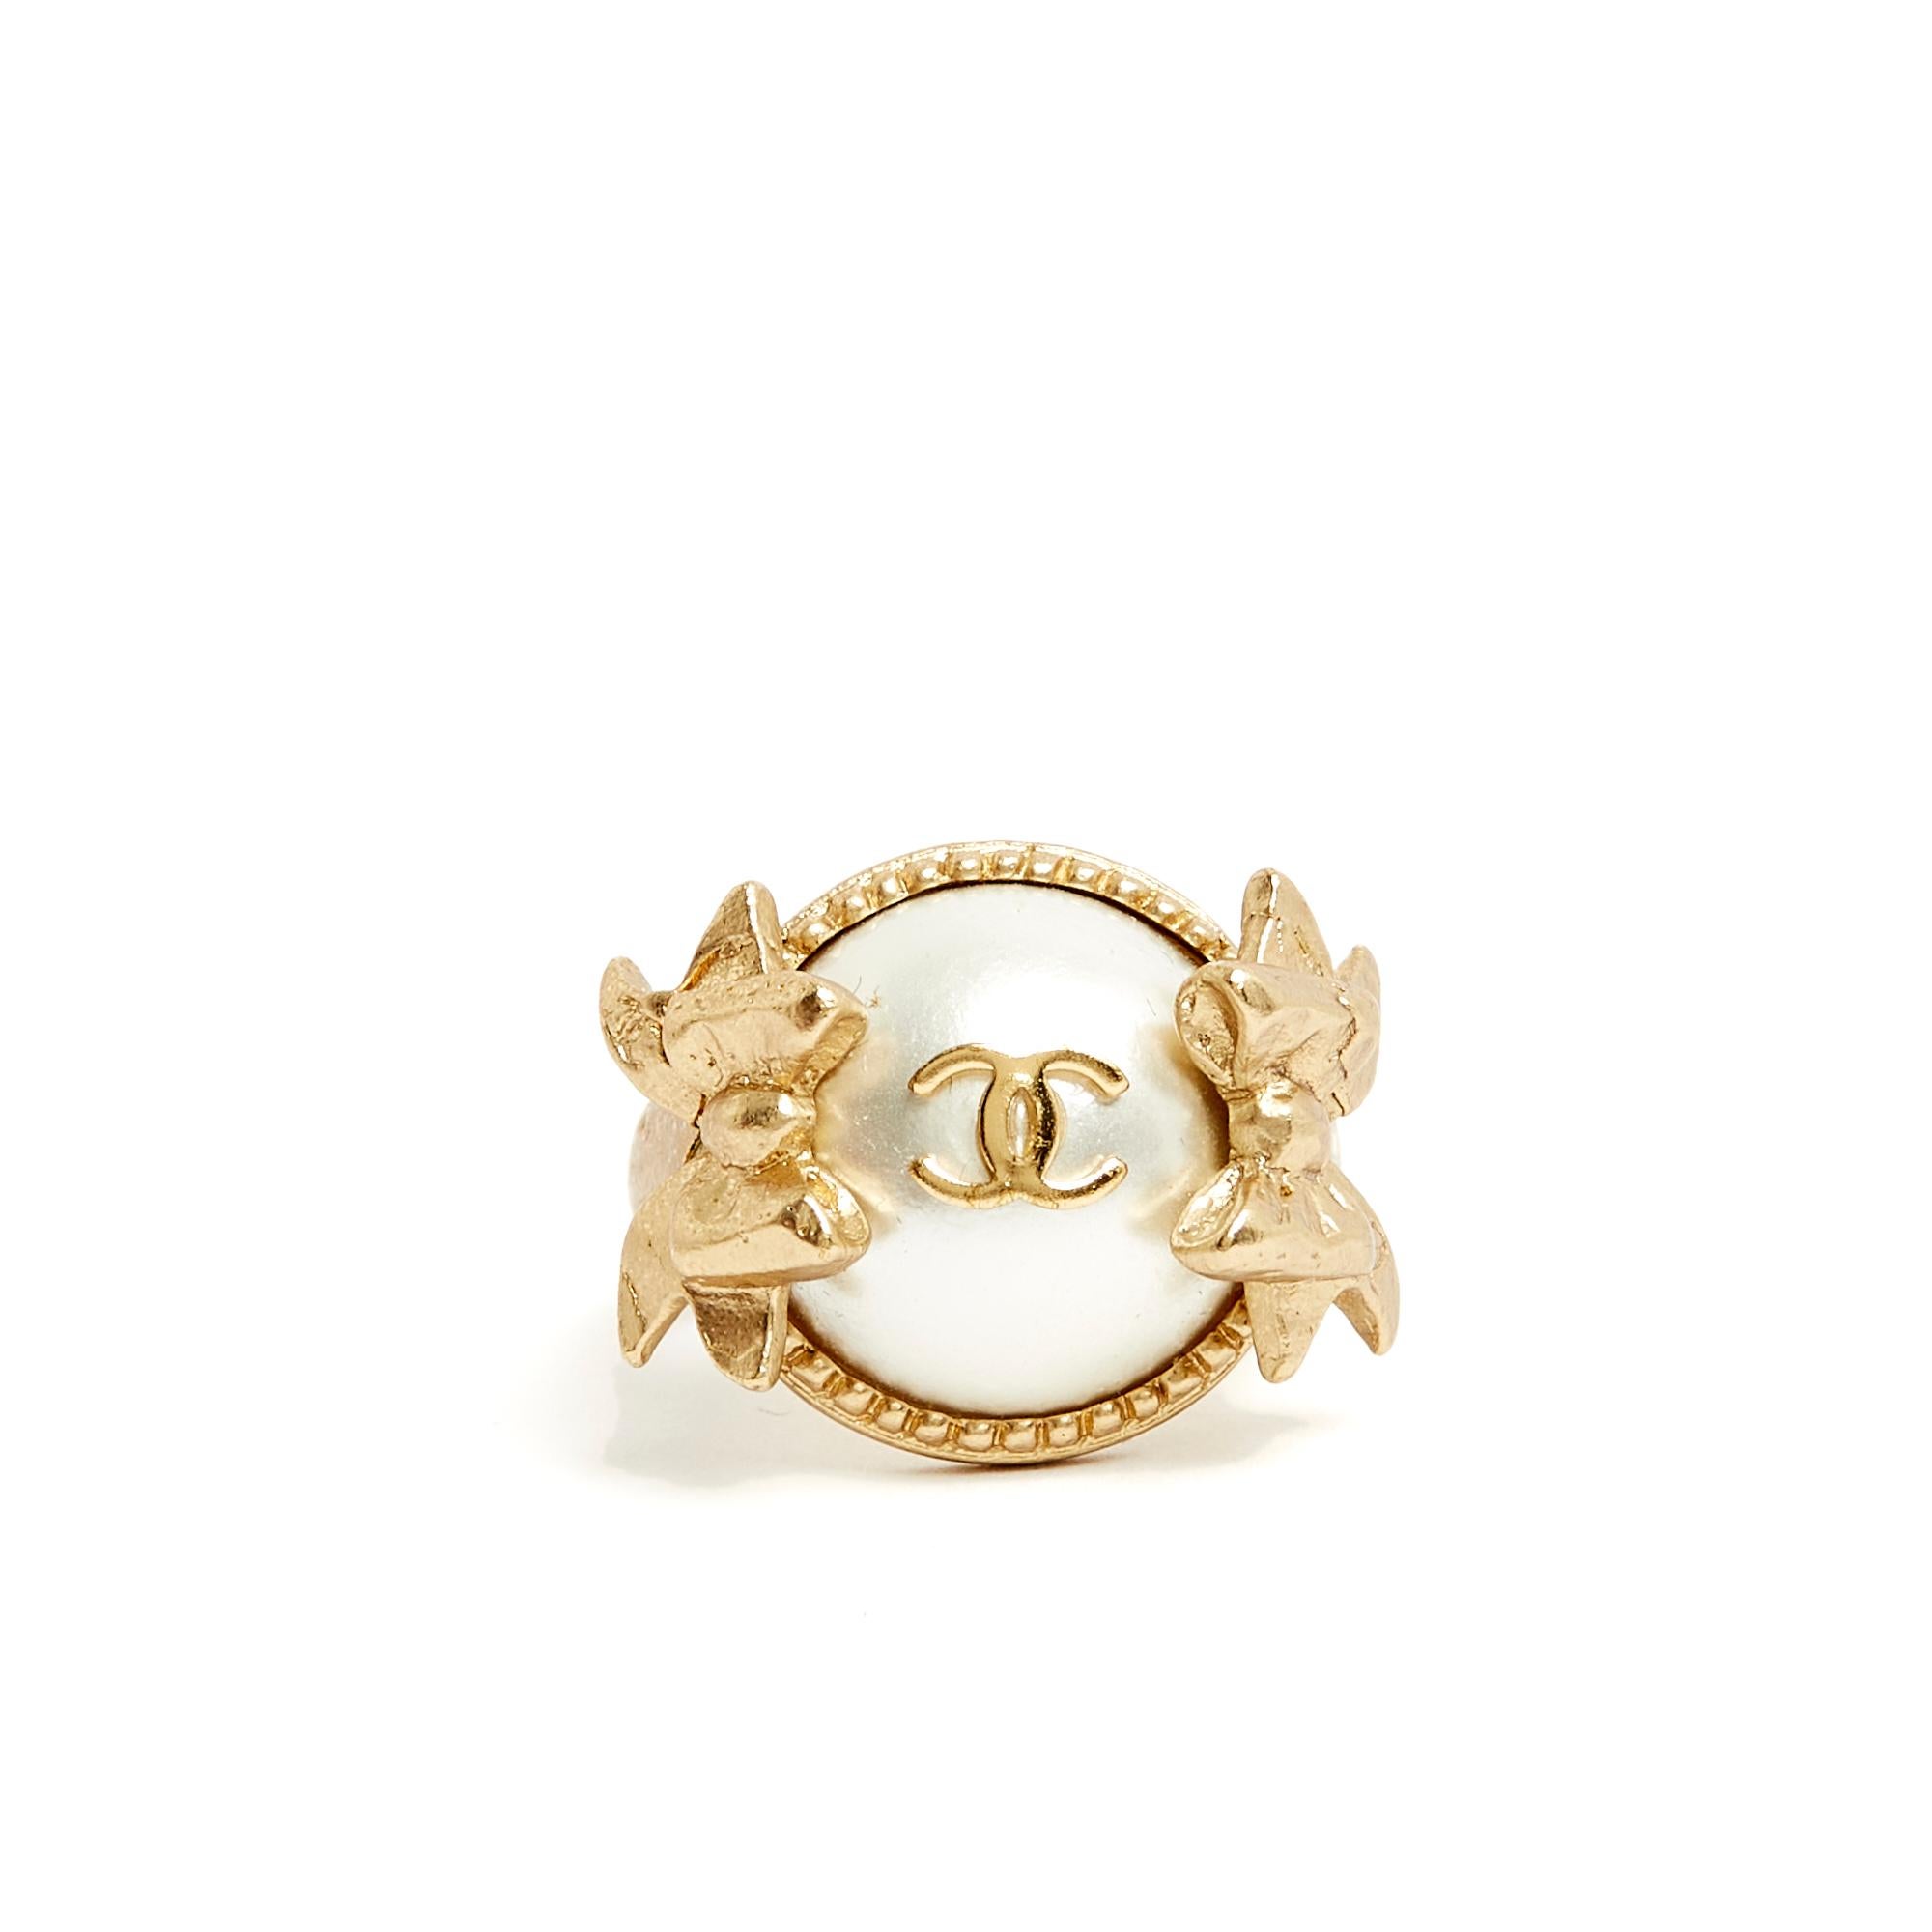 Chanel ring in matte gold metal with a ring topped with a half fancy pearl surrounded by 2 ribbons and topped with a CC symbol. Finger size 54/55 mm or US7.25, diameter 1.75 cm, total height of the ring 2.8 cm. The ring is delivered without invoice